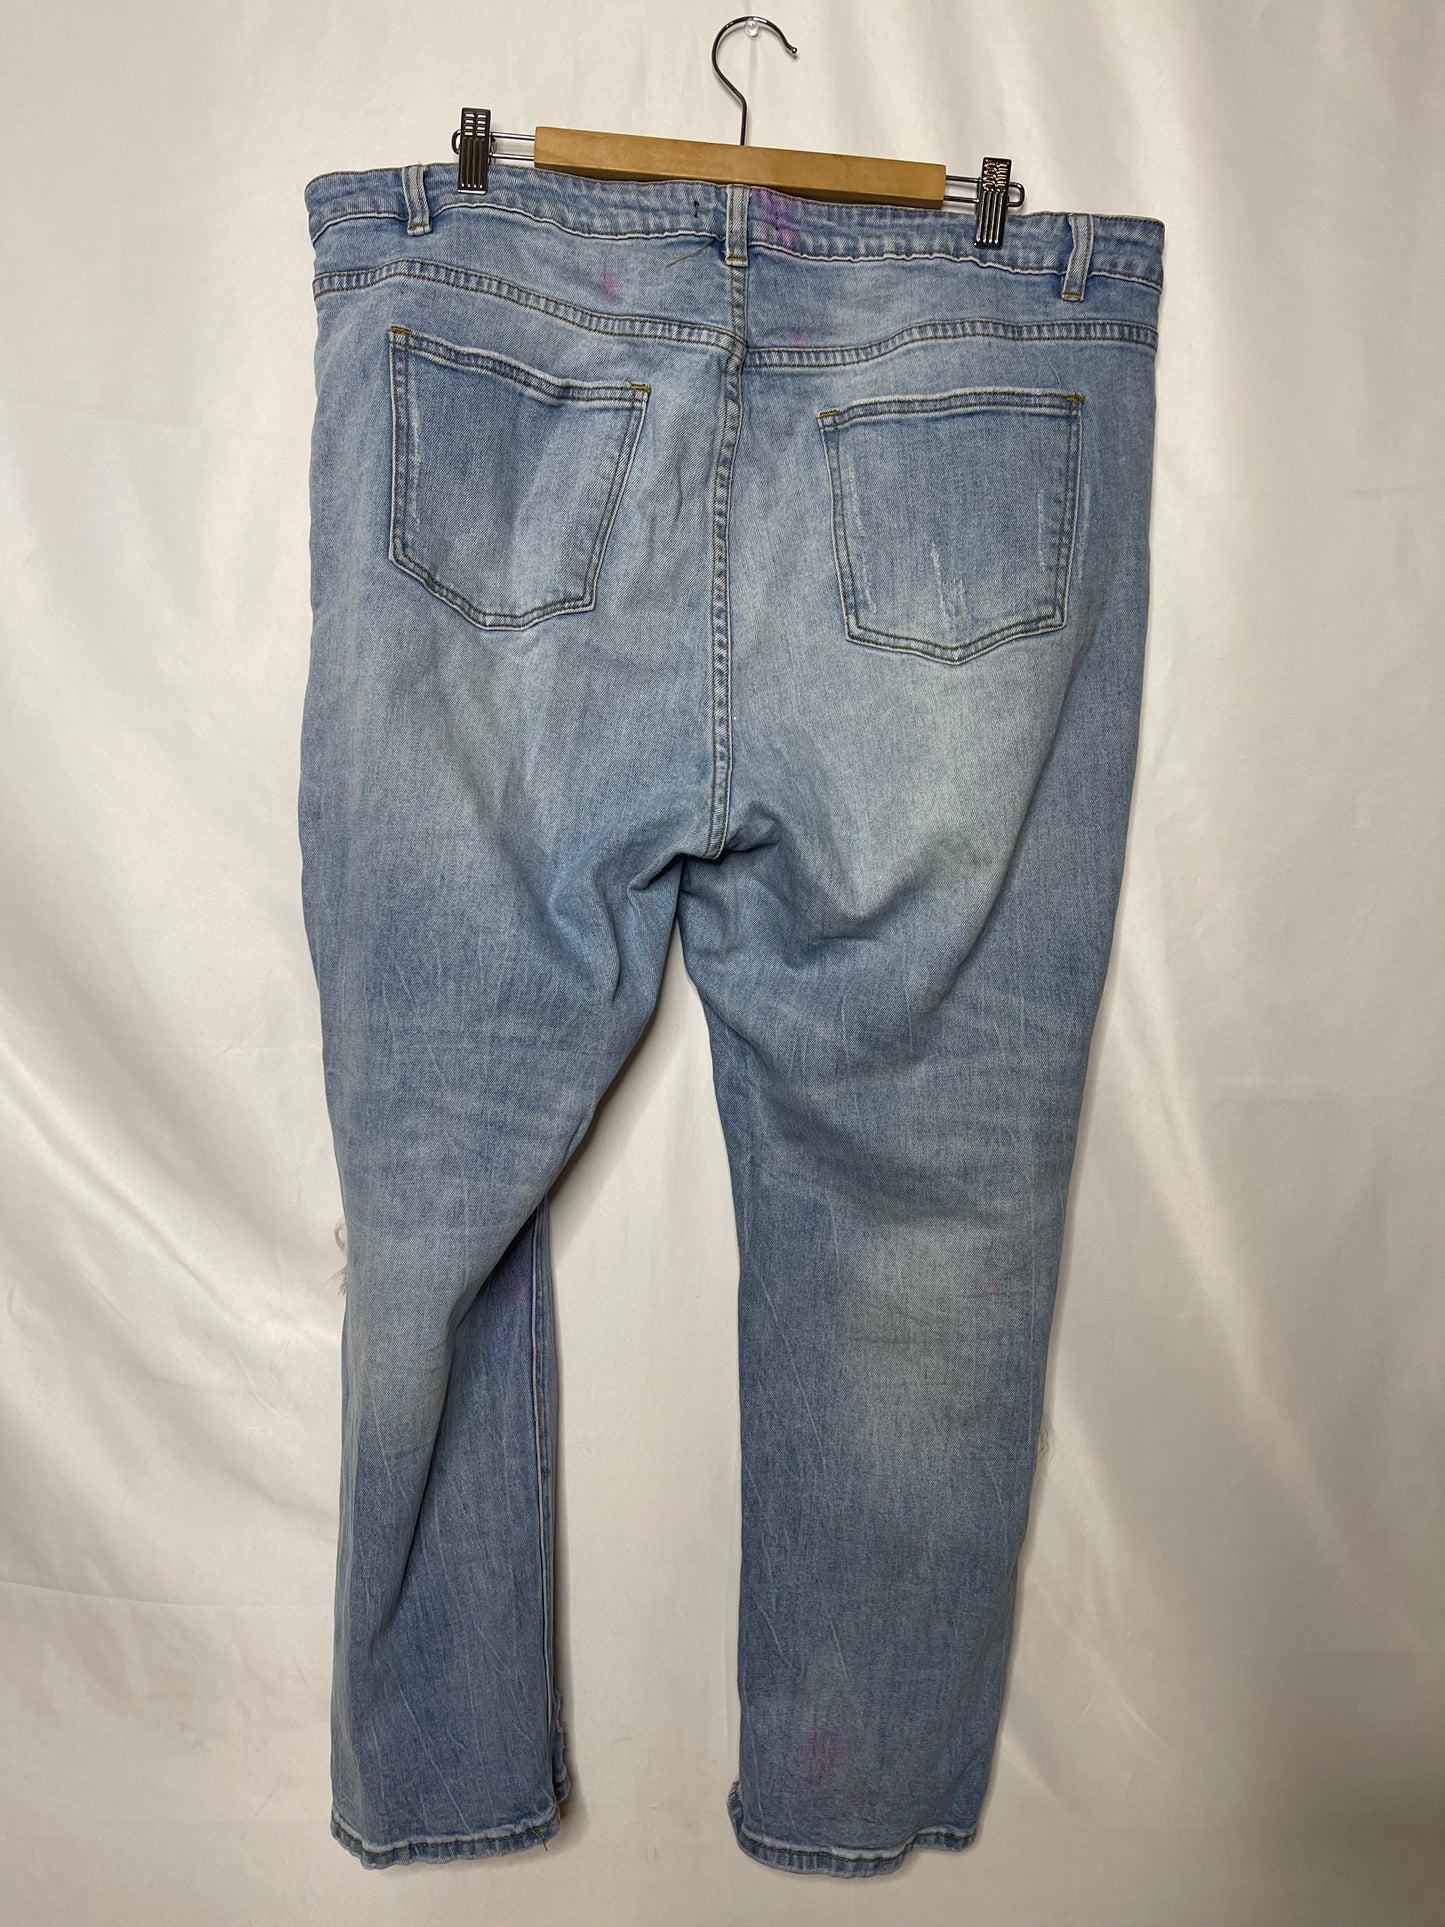 18 Light wash distressed loose fit  jeans